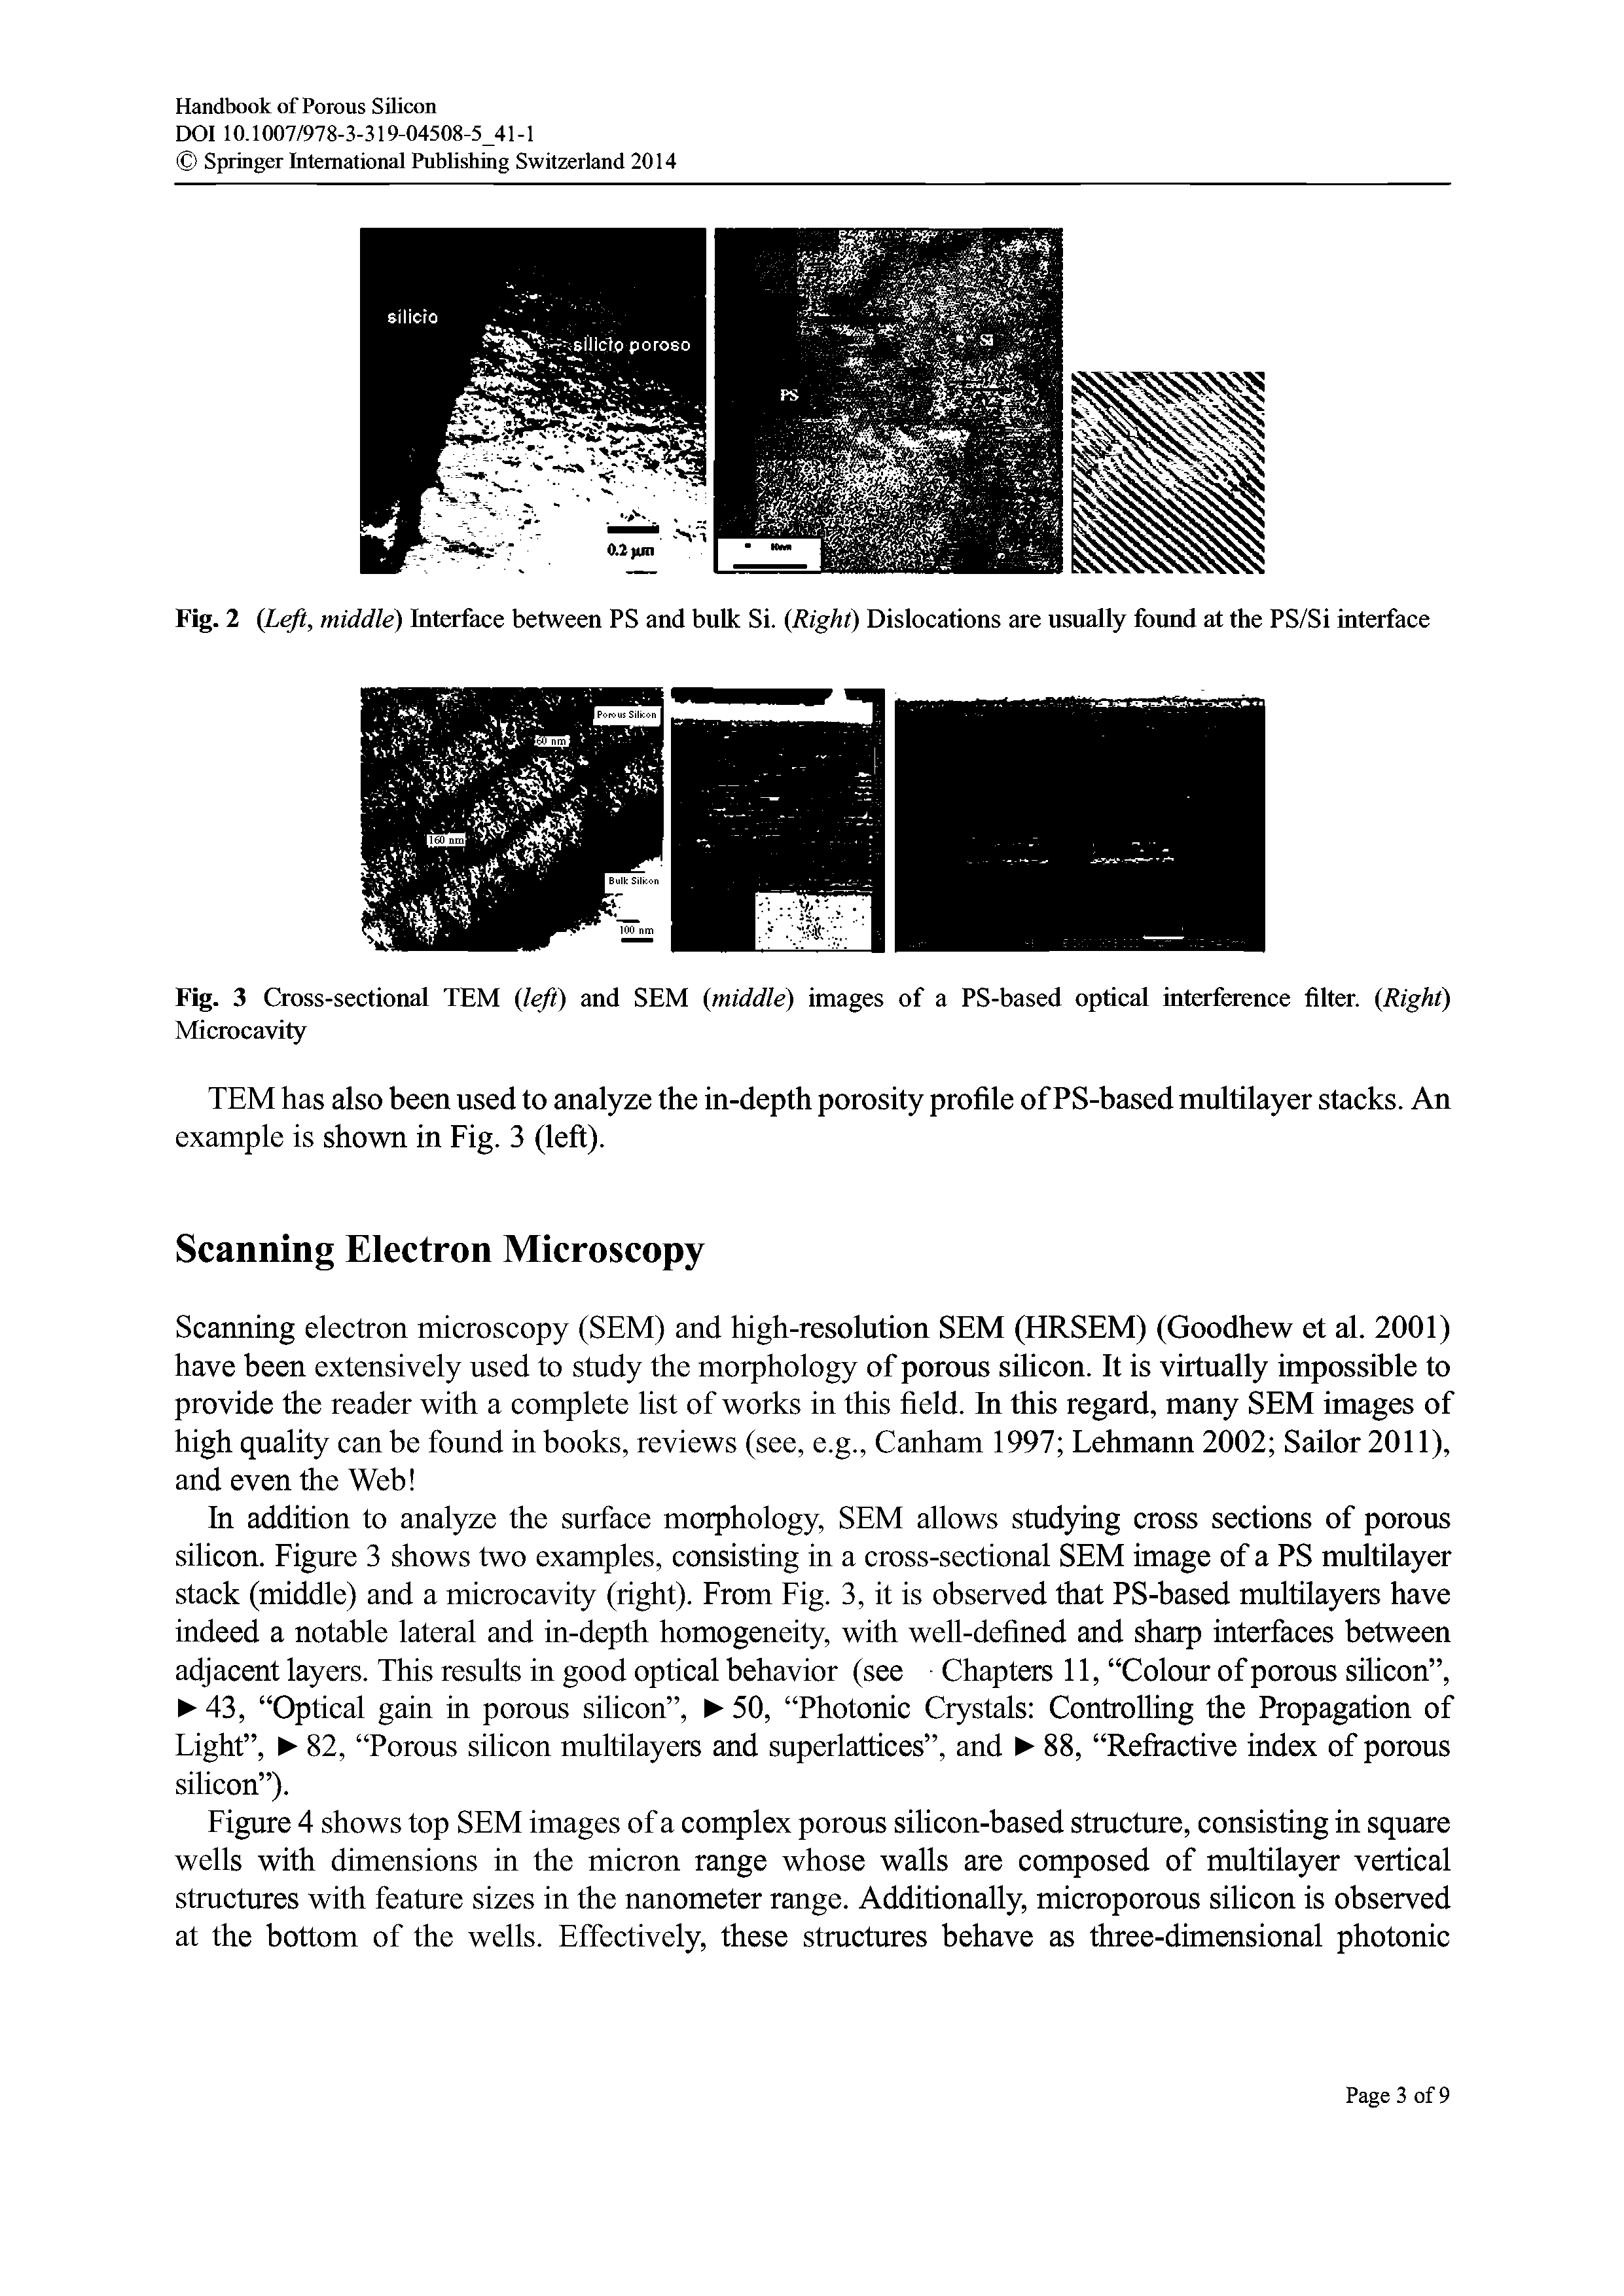 Fig. 3 Cross-sectional TEM (left) and SEM (middle) images of a PS-based optical interference filter. (Right) Microcavity...